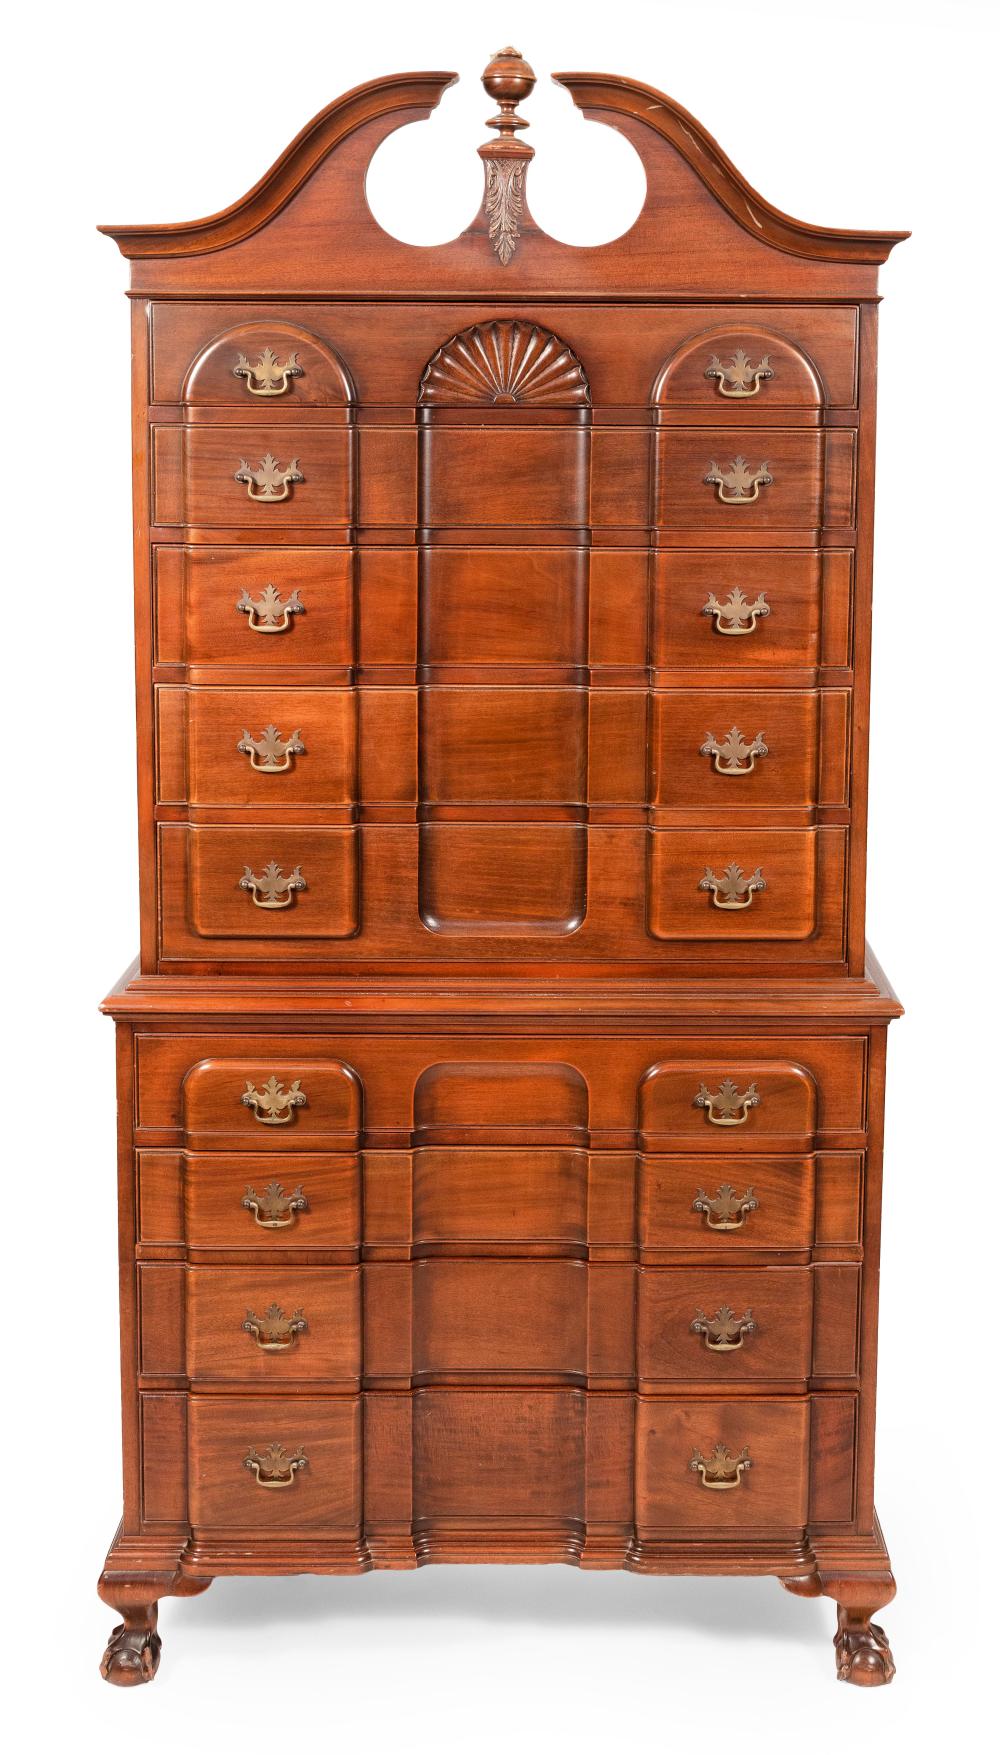 CHIPPENDALE-STYLE BLOCK-FRONT CHEST